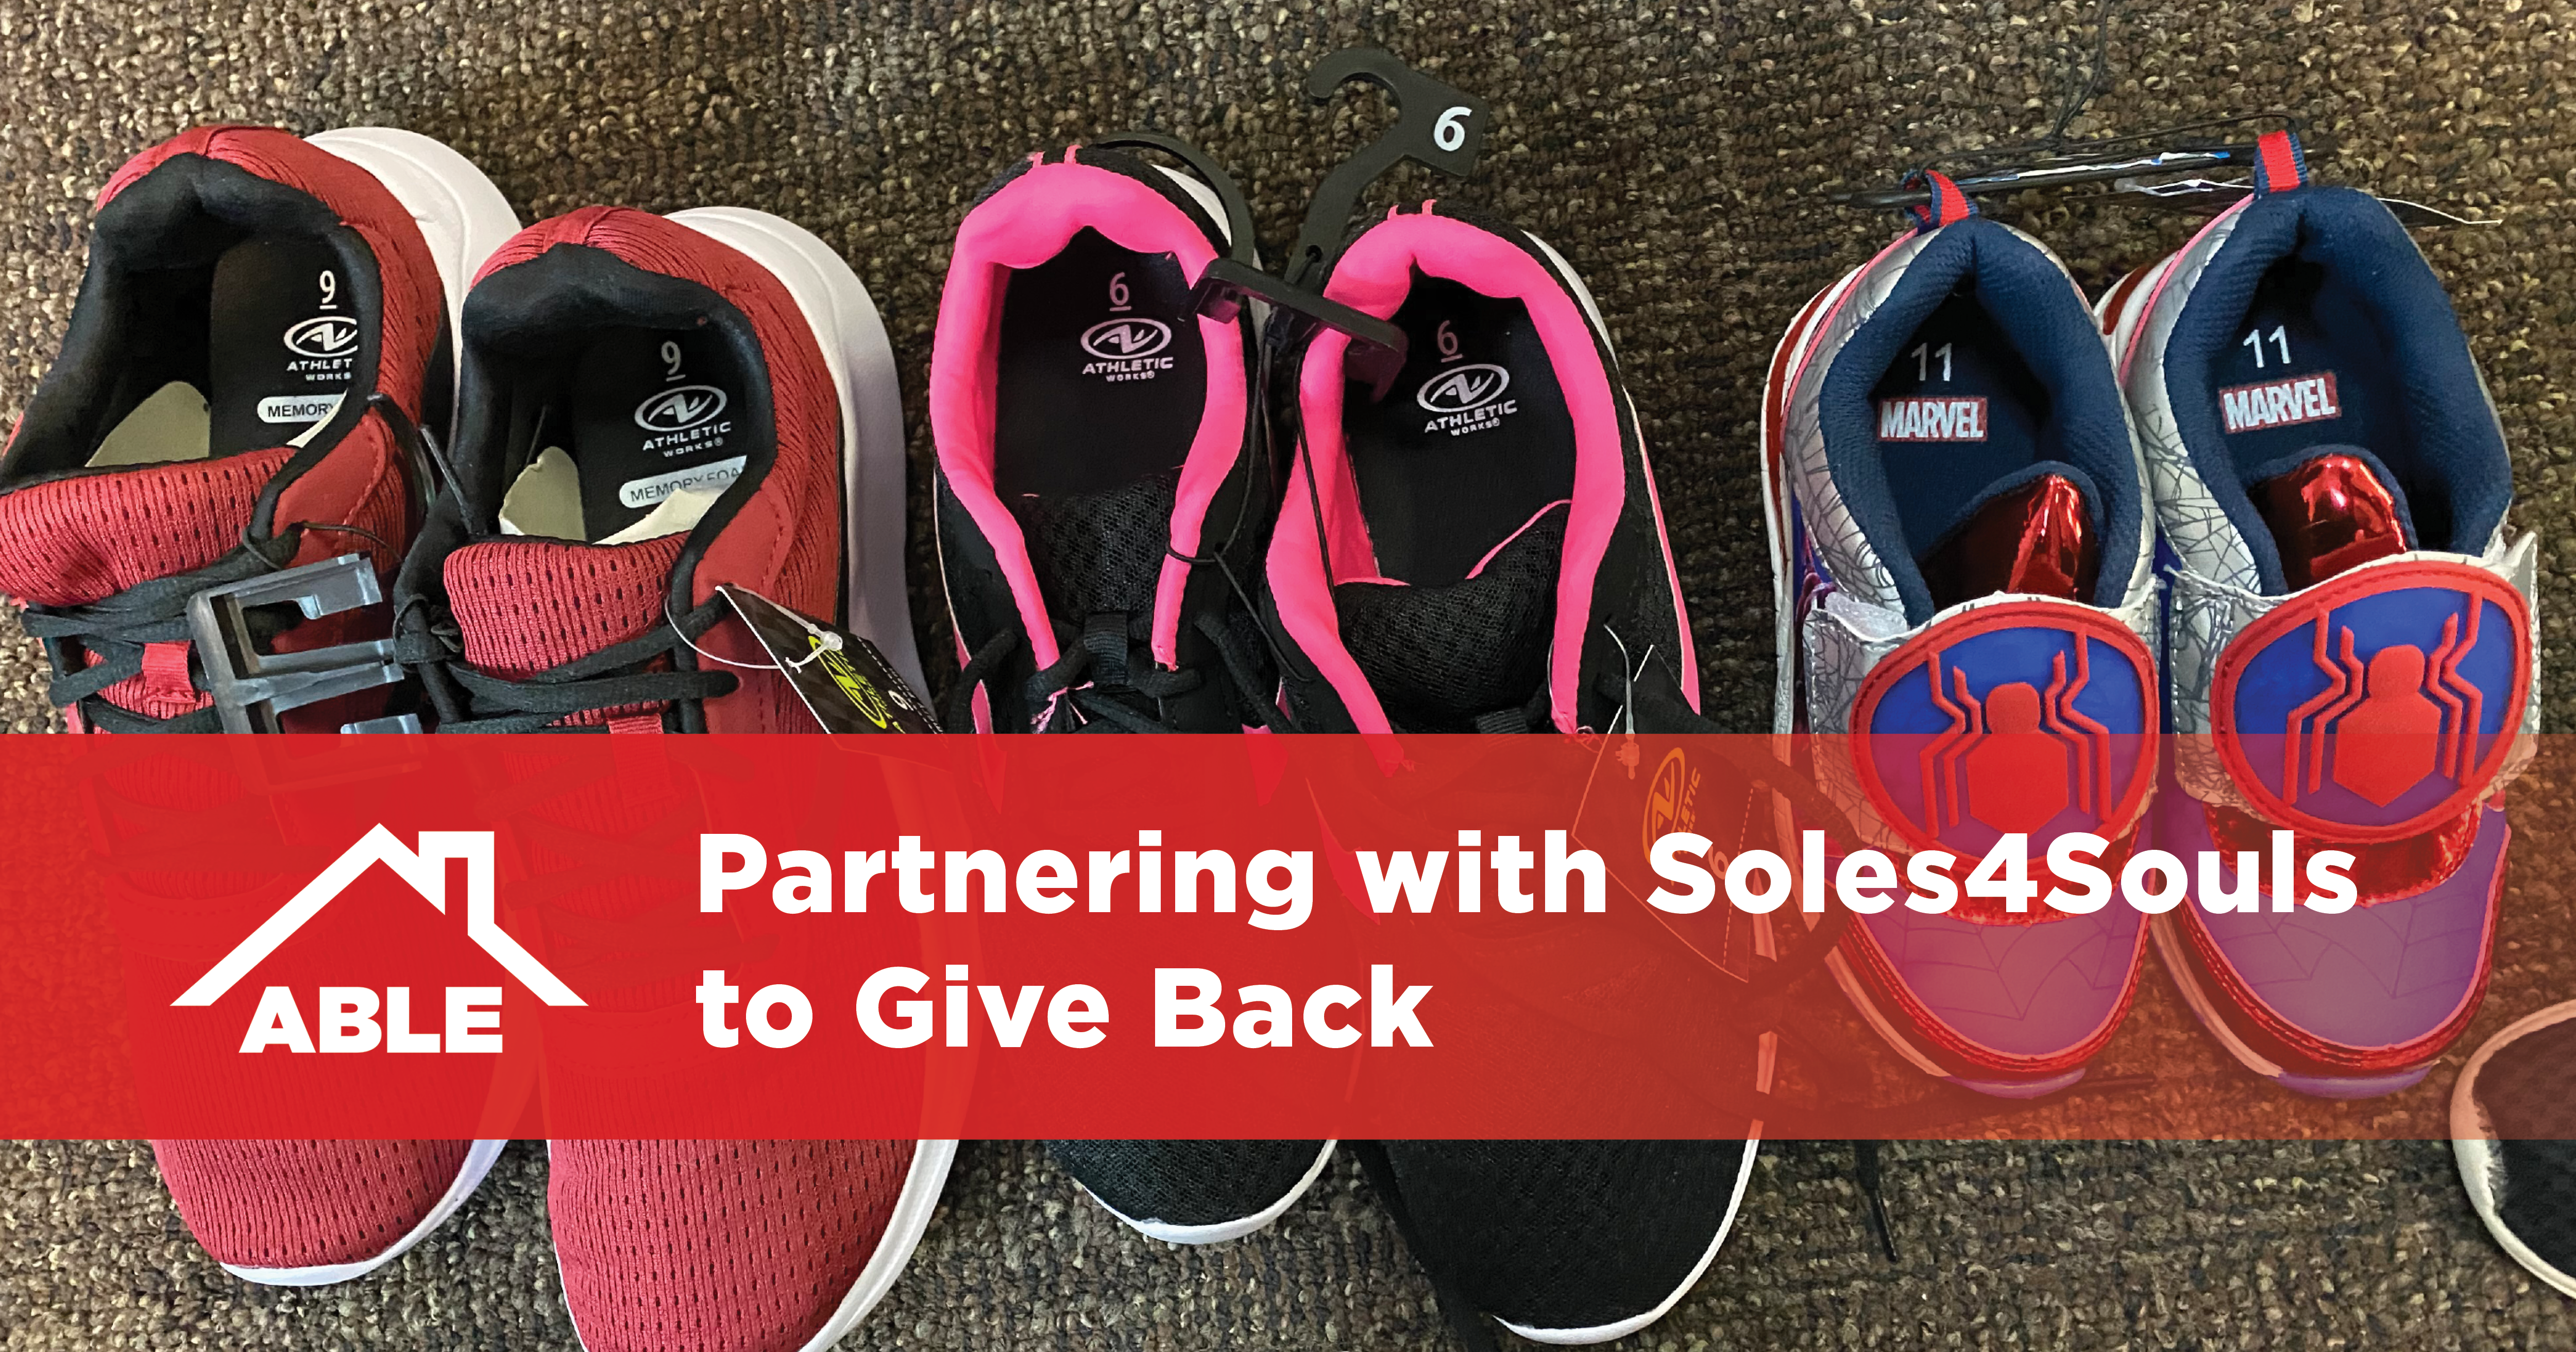 Partnering with Souls4Souls to Give Back